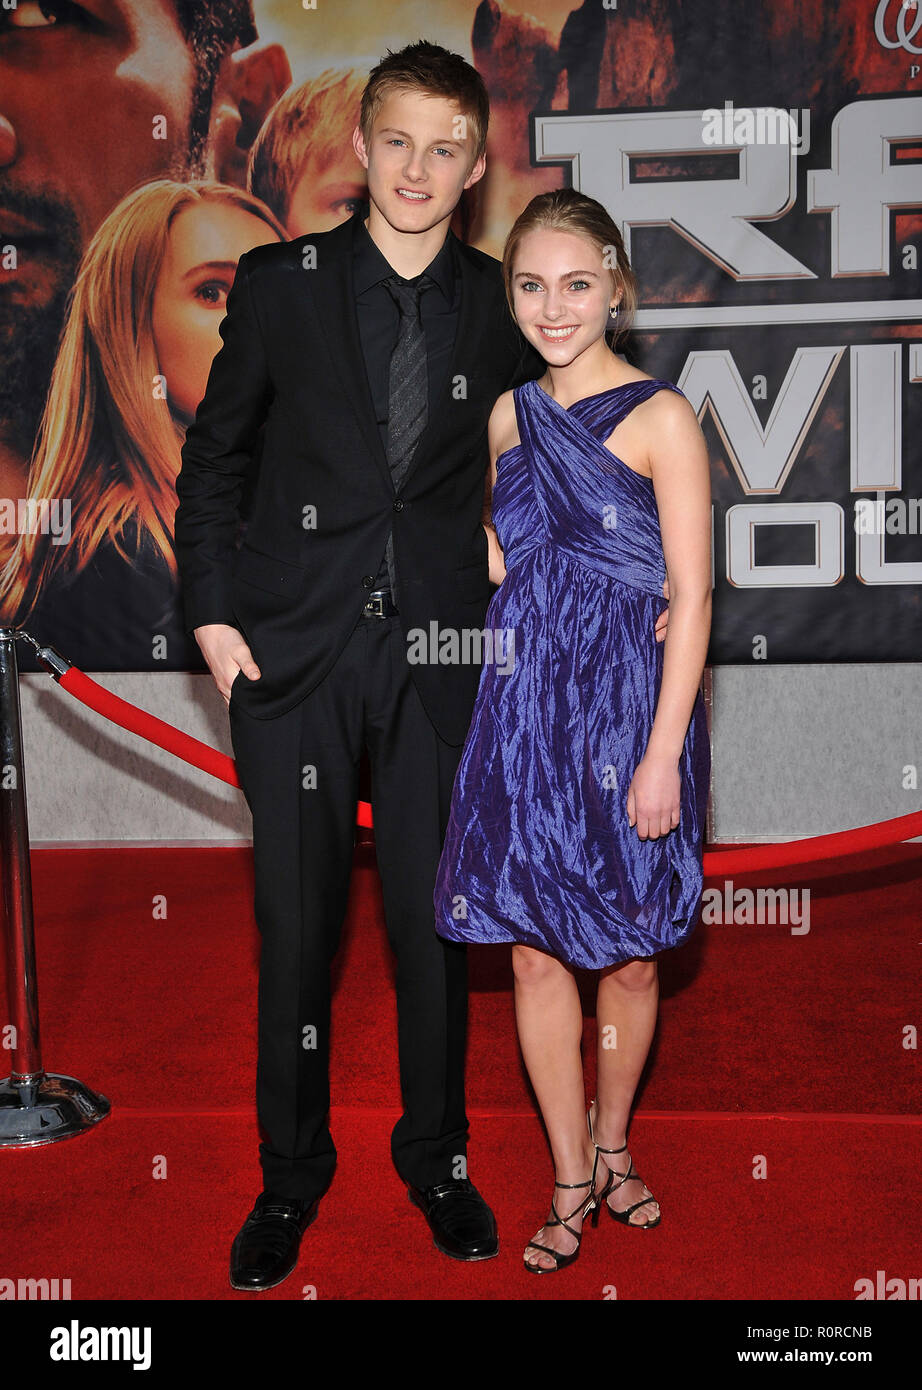 Alexander Ludwig and AnnaSophia Robb - Race To Witch Mountain Premiere at the El Capitan Theatre In Los Angeles.          -            LudwigAlexander Stock Photo